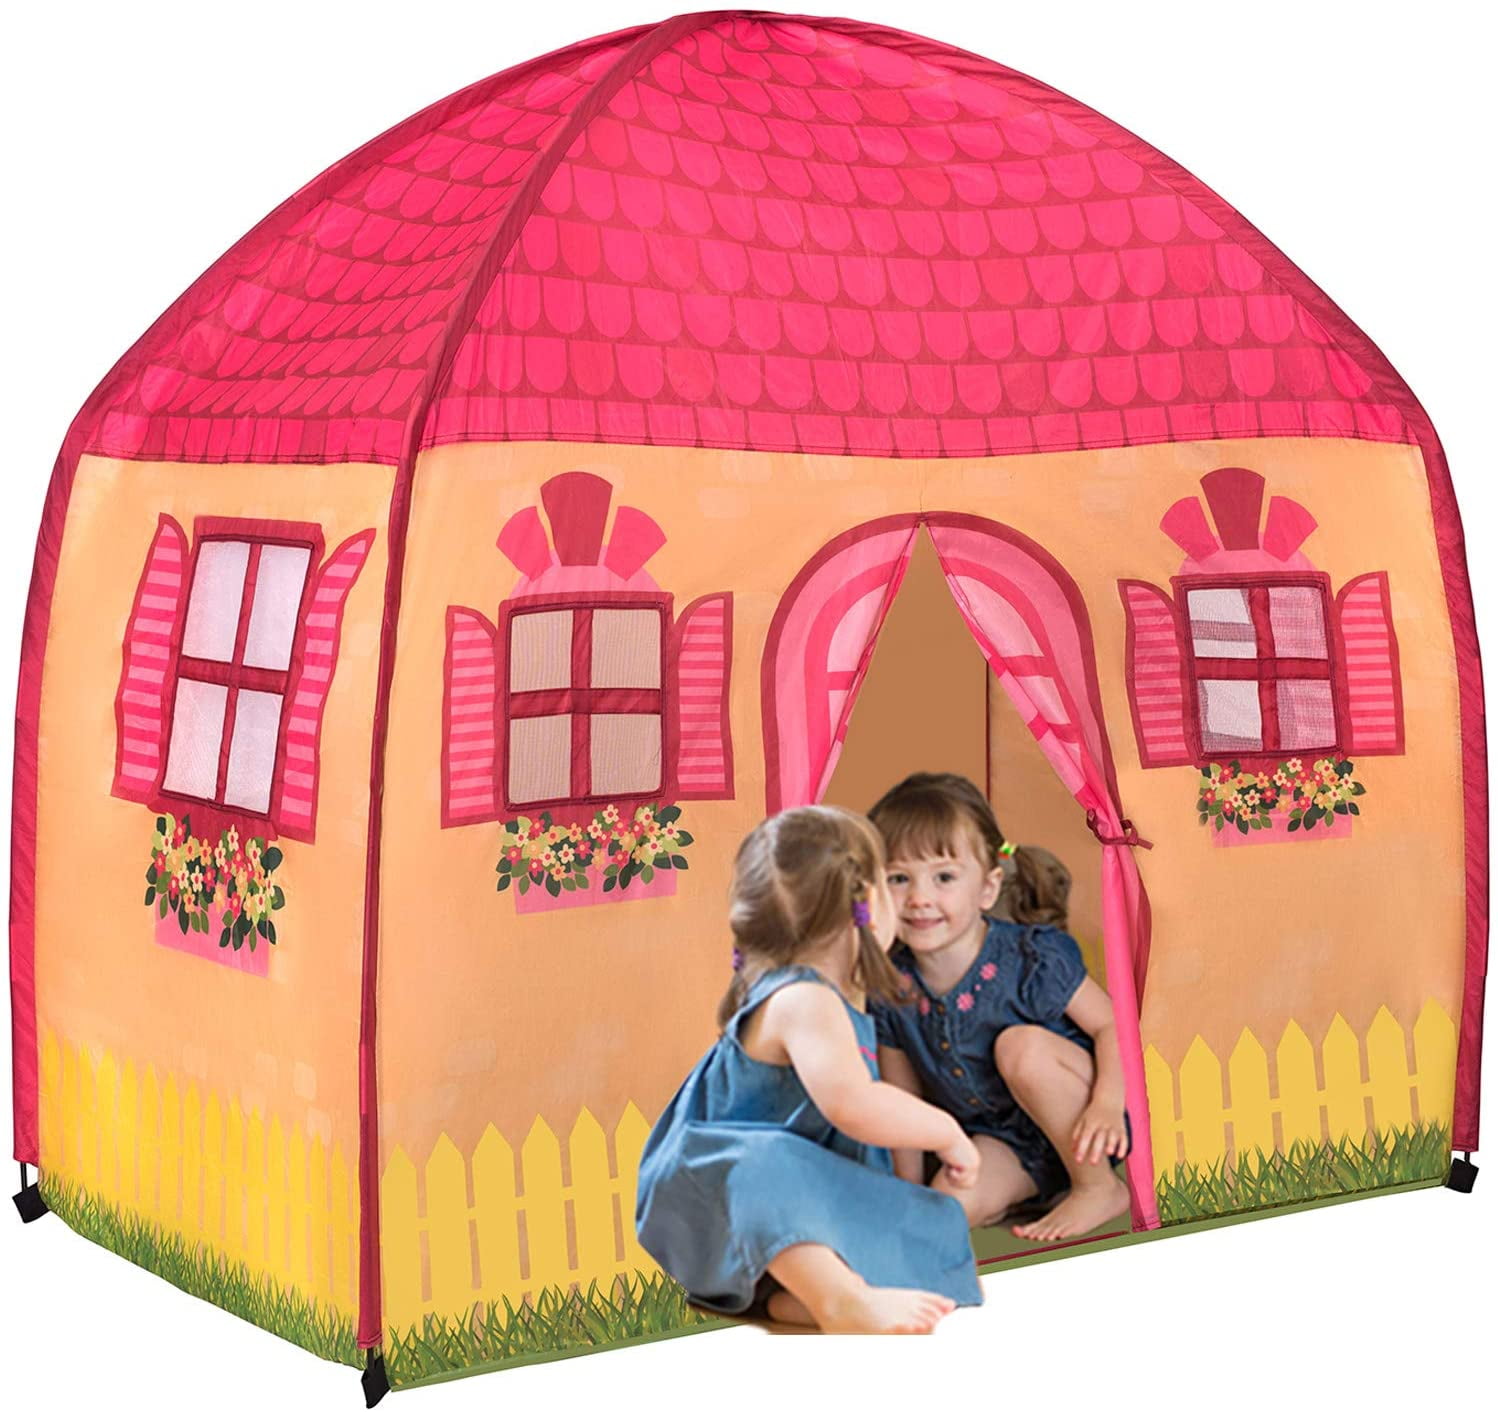 Girls Sweet House Themed Play Tent for Kids Children Indoor & Outdoor Play 